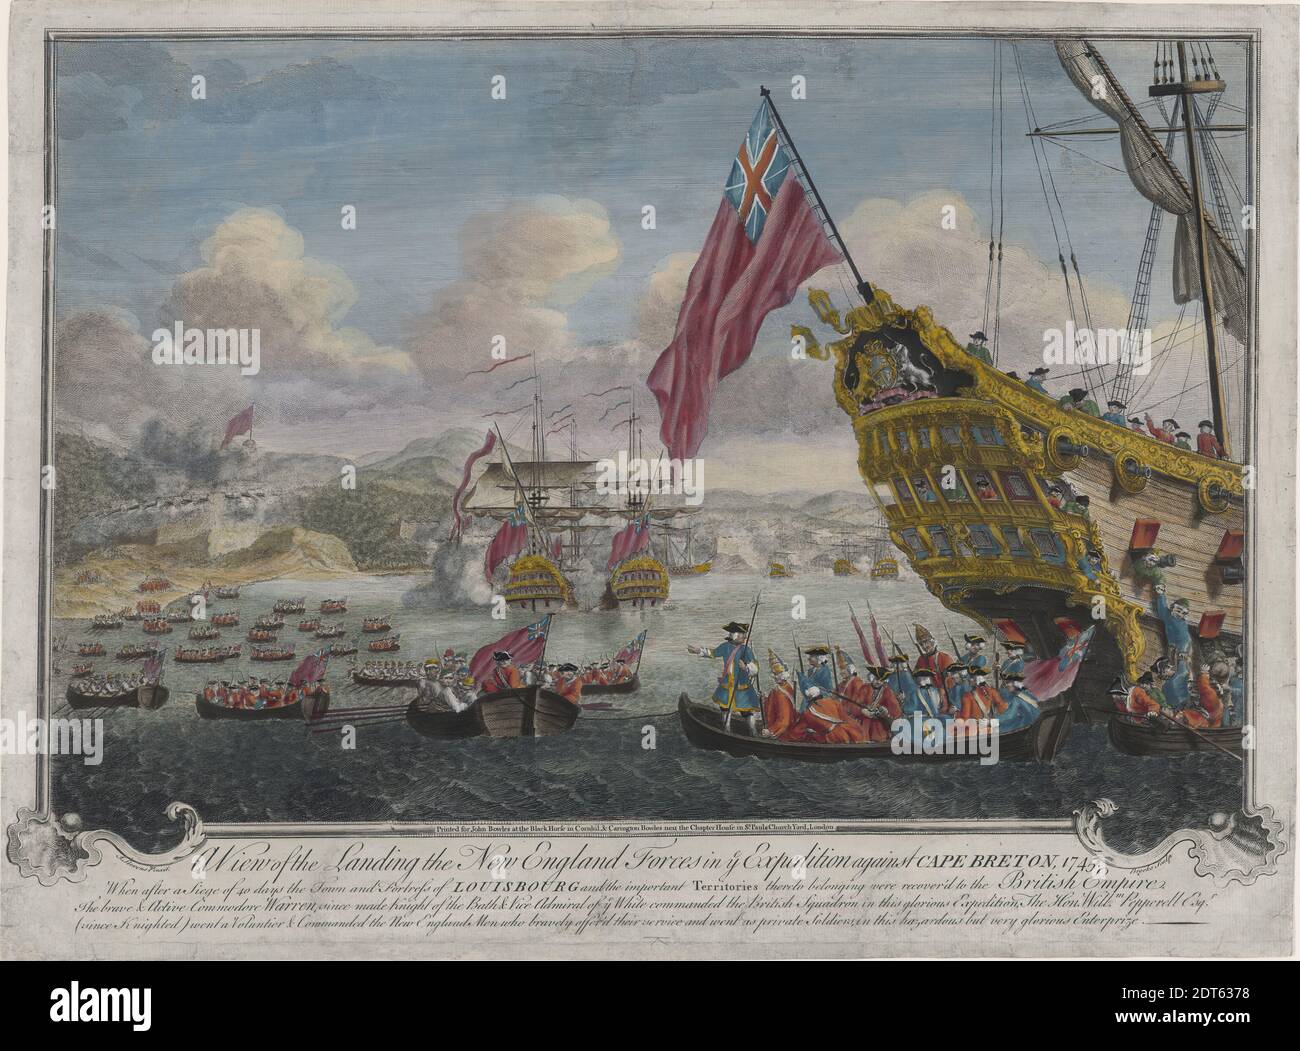 Artist: John Brooks, Irish, active 1730–56, After: J. Stevens, American, A View of the Landing of the New England Forces in ye Expedition against Cape Breton, 1745, Colored line engraving, sheet: 38.4 × 52.1 cm (15 1/8 × 20 1/2 in.), Irish, 18th century, Works on Paper - Prints Stock Photo